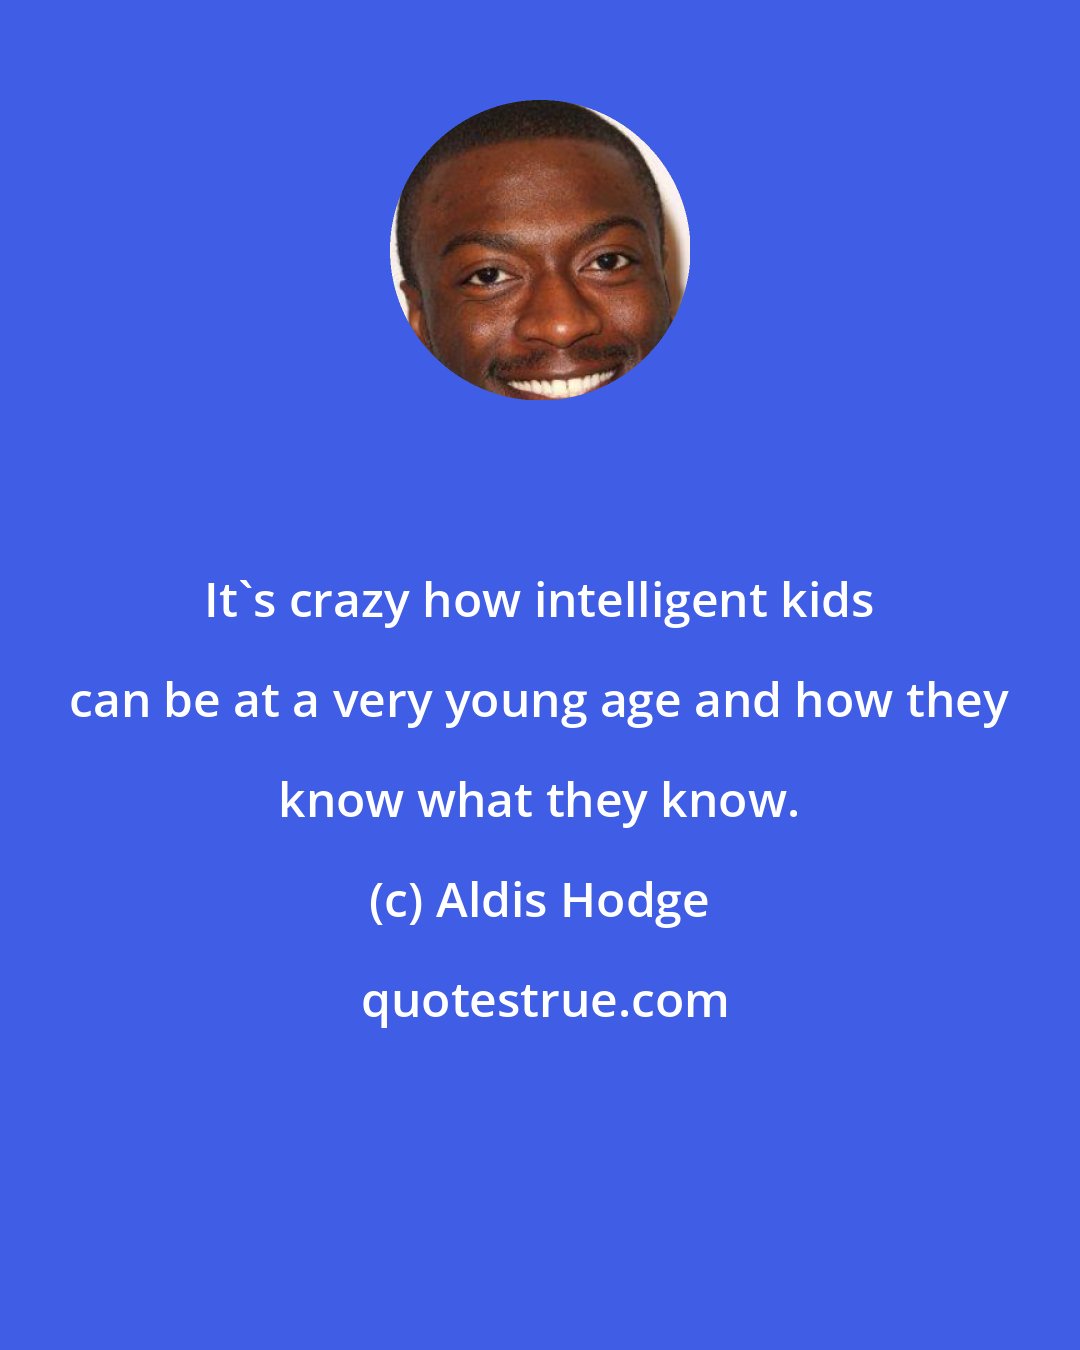 Aldis Hodge: It's crazy how intelligent kids can be at a very young age and how they know what they know.